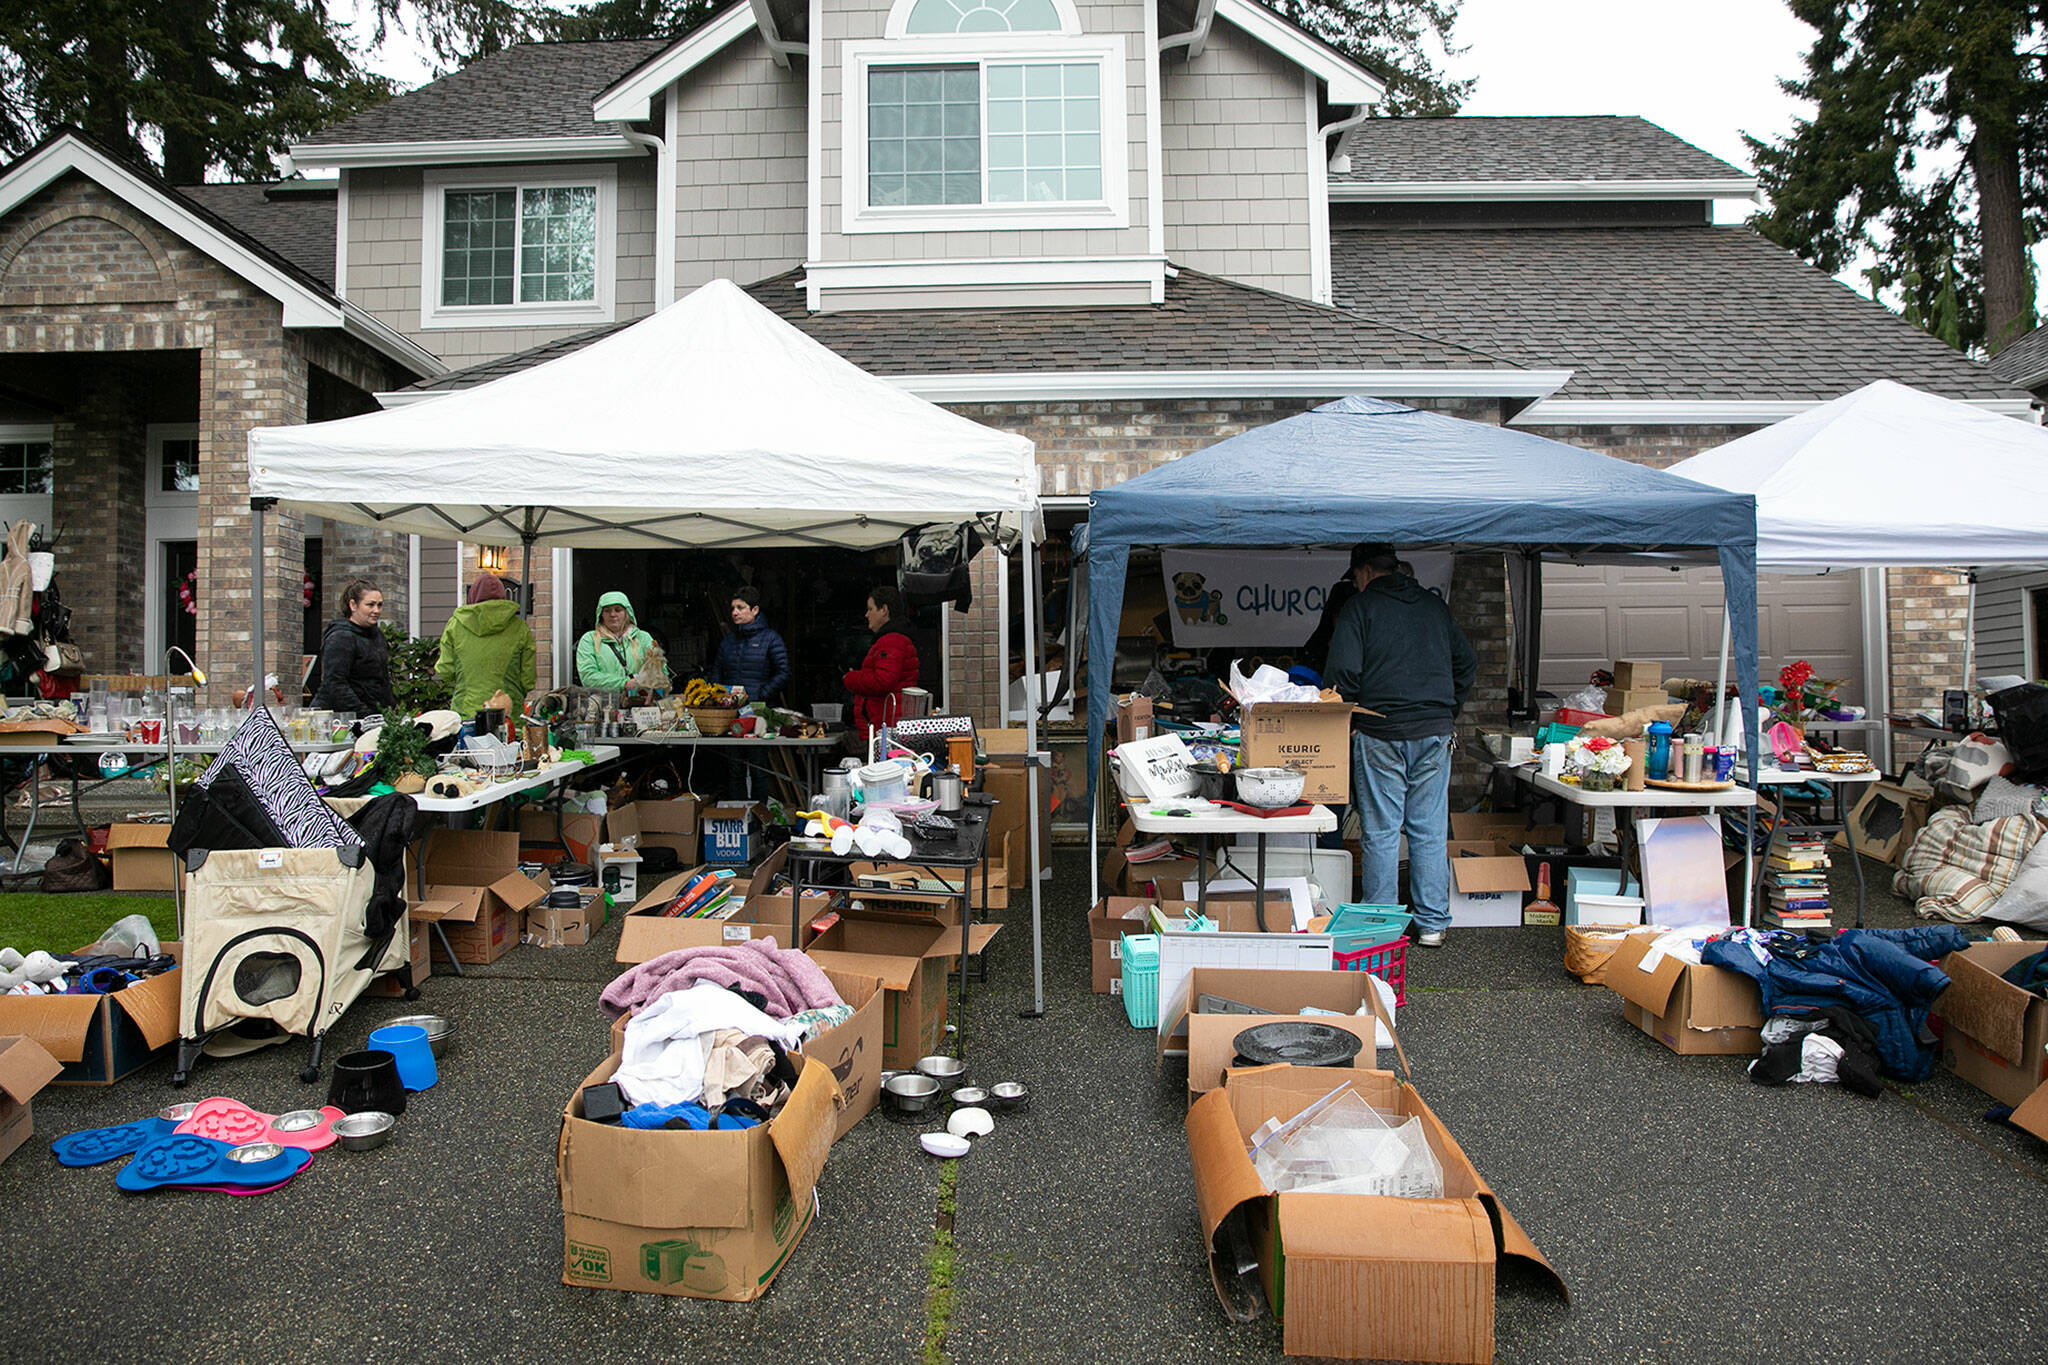 People look around at the non-profit group Church of Pugճ garage sale during the semi-annual Mill Creek community garage sale Saturday in Mill Creek. Many people braved the heavy rain to venture from sale to sale. (Ryan Berry / The Herald)